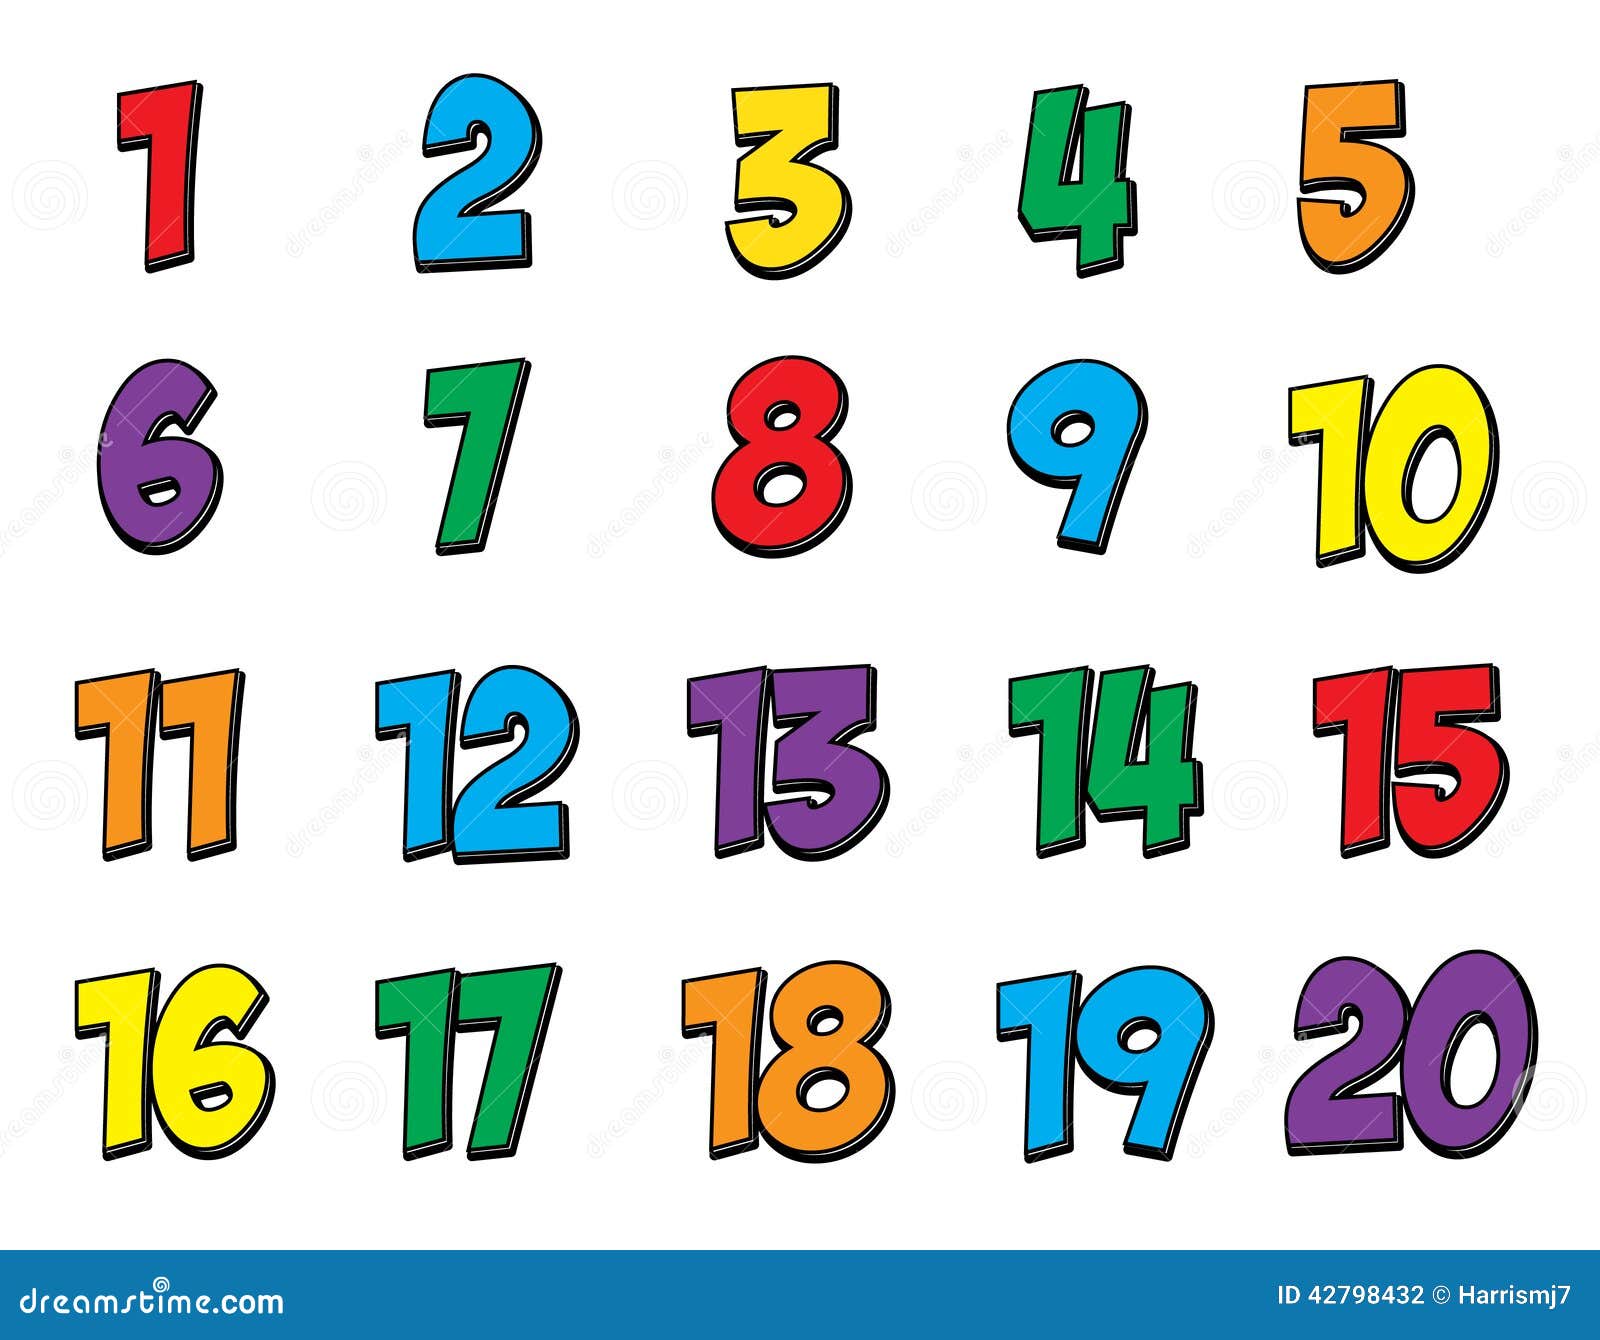 free clip art numbers 1 to 20 - photo #26